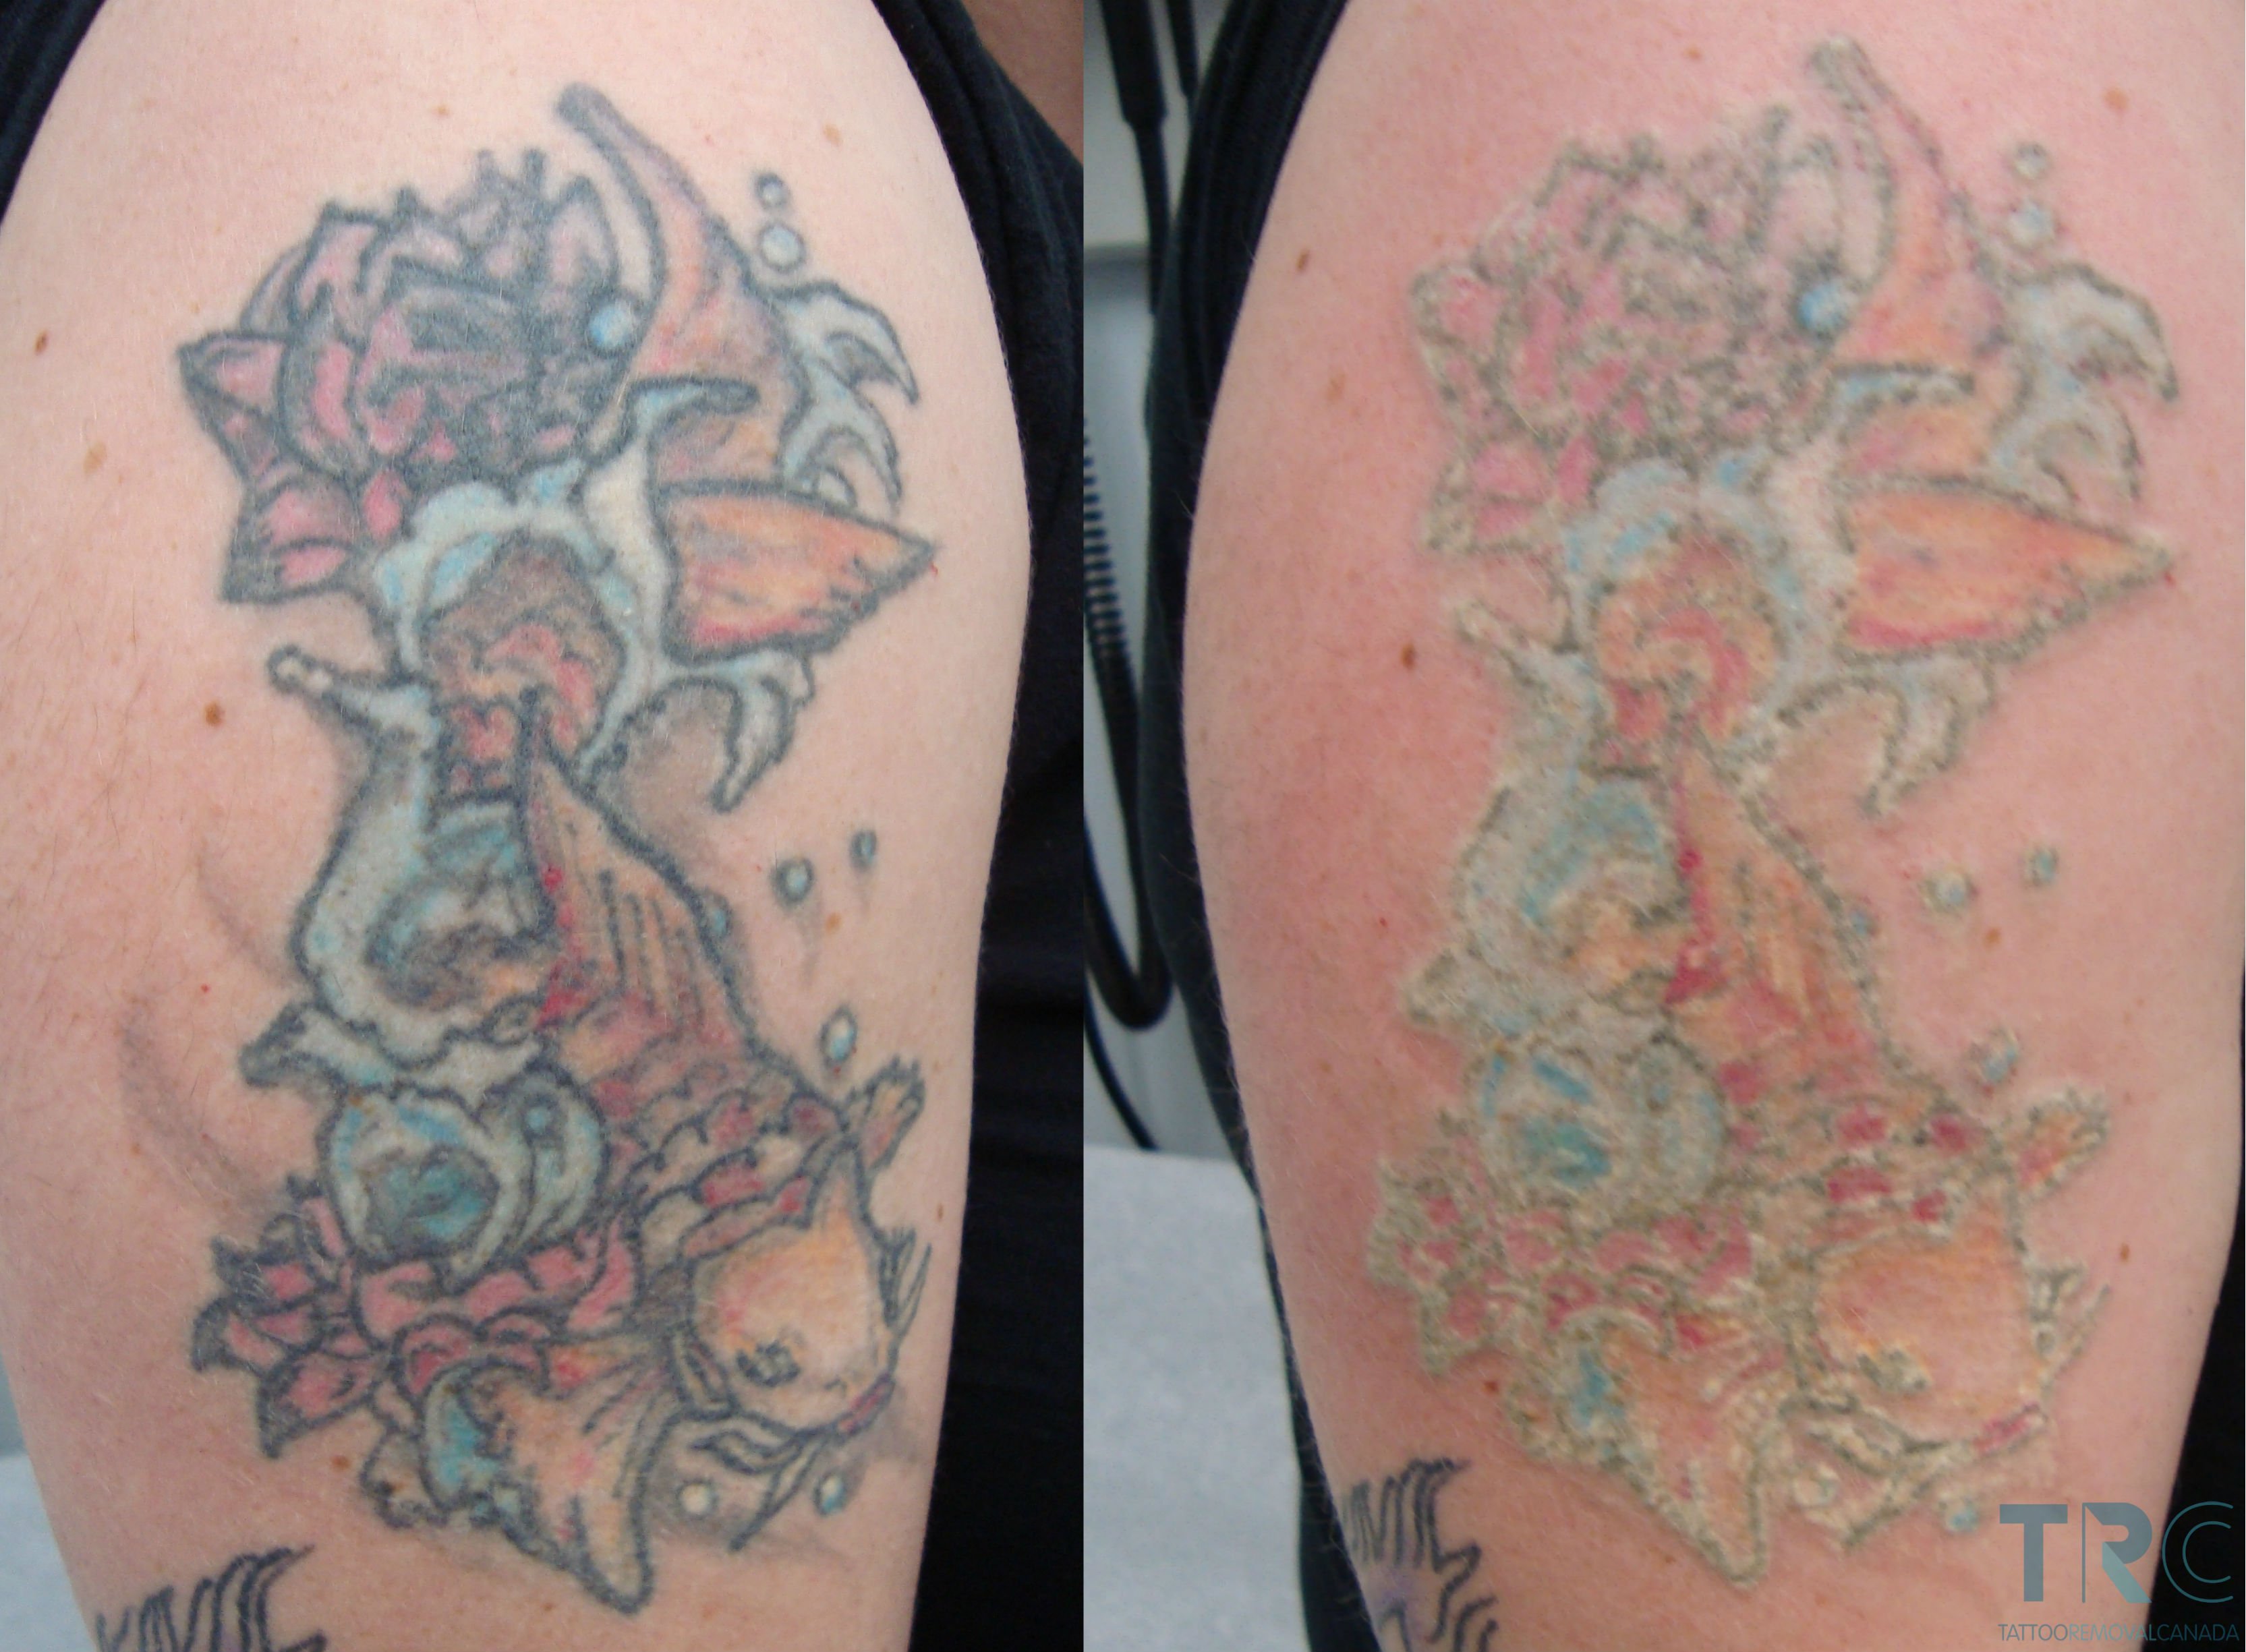 How to Fix a Smudged or Faded Tattoo Stencil - wide 5